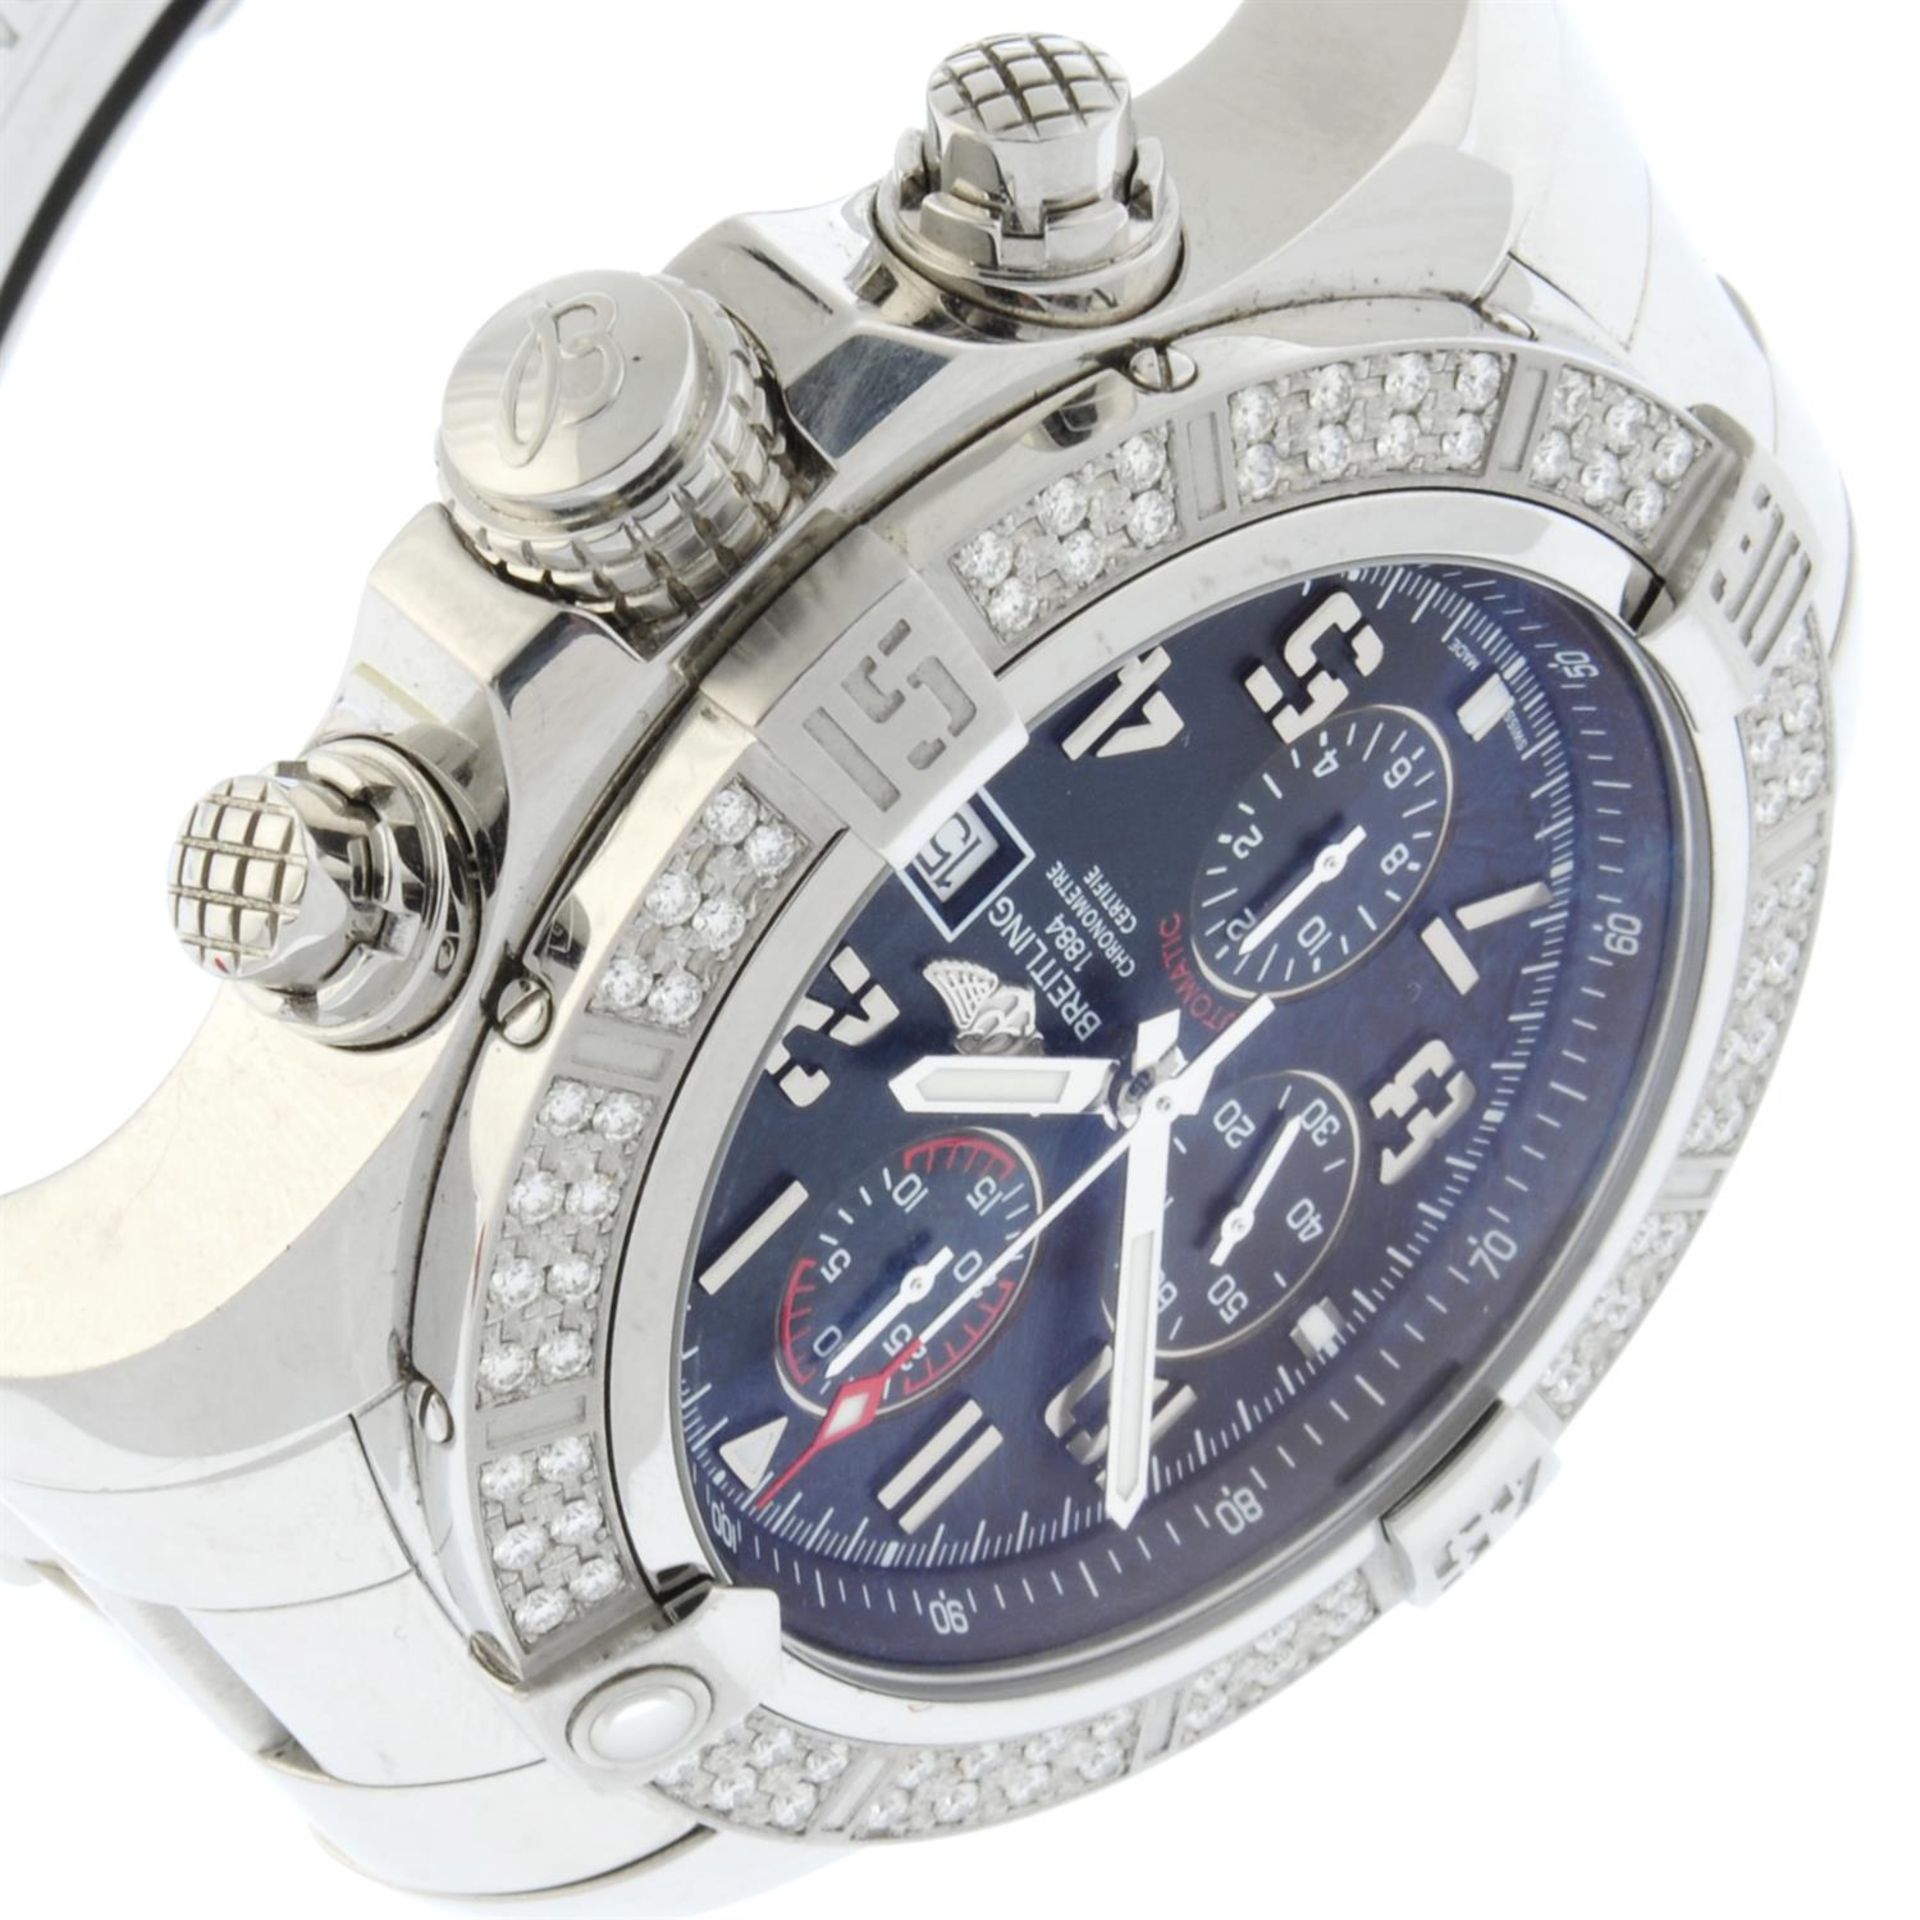 Breitling - a Super Avenger II chronograph watch, 48mm. - Image 3 of 7